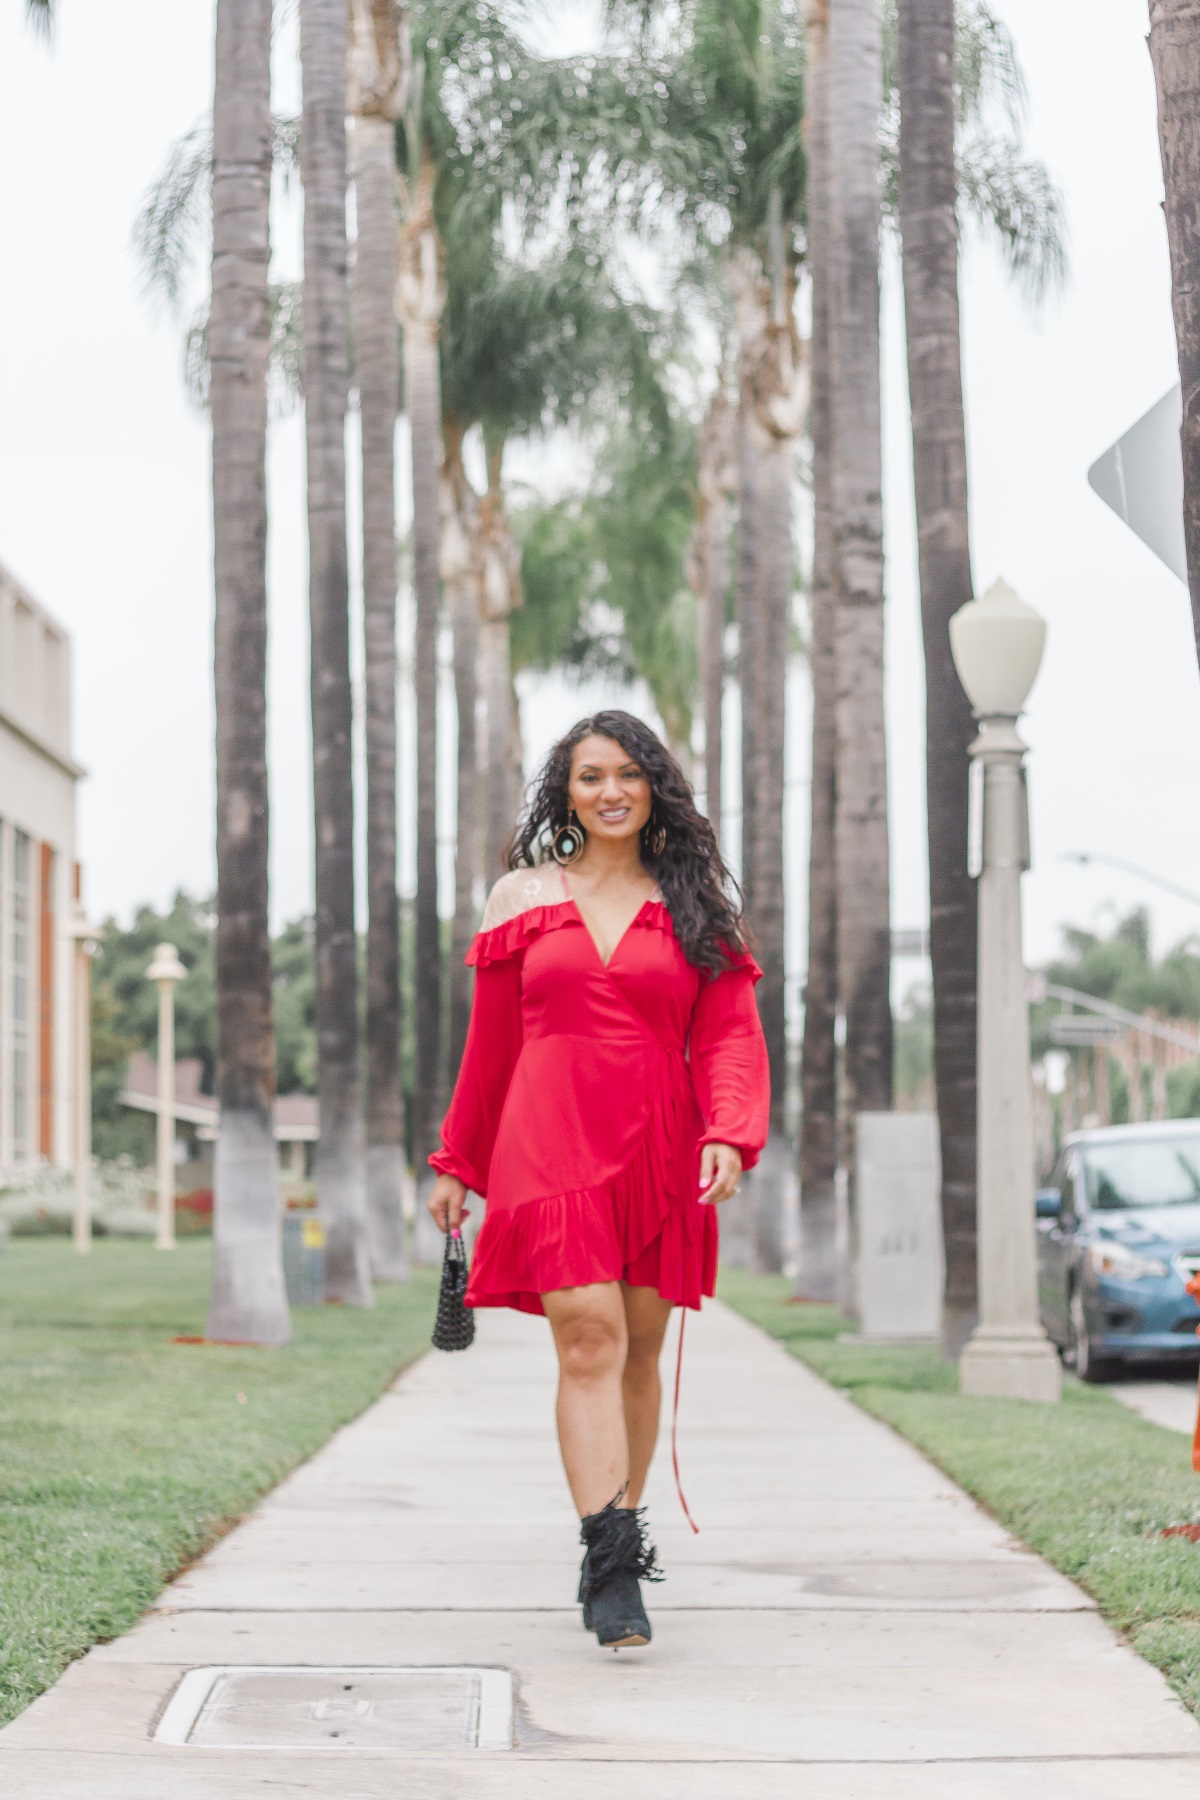 Little Red Dress | Debbie Savage Orange County Fashion Blogger at To Thine Own Style Be True